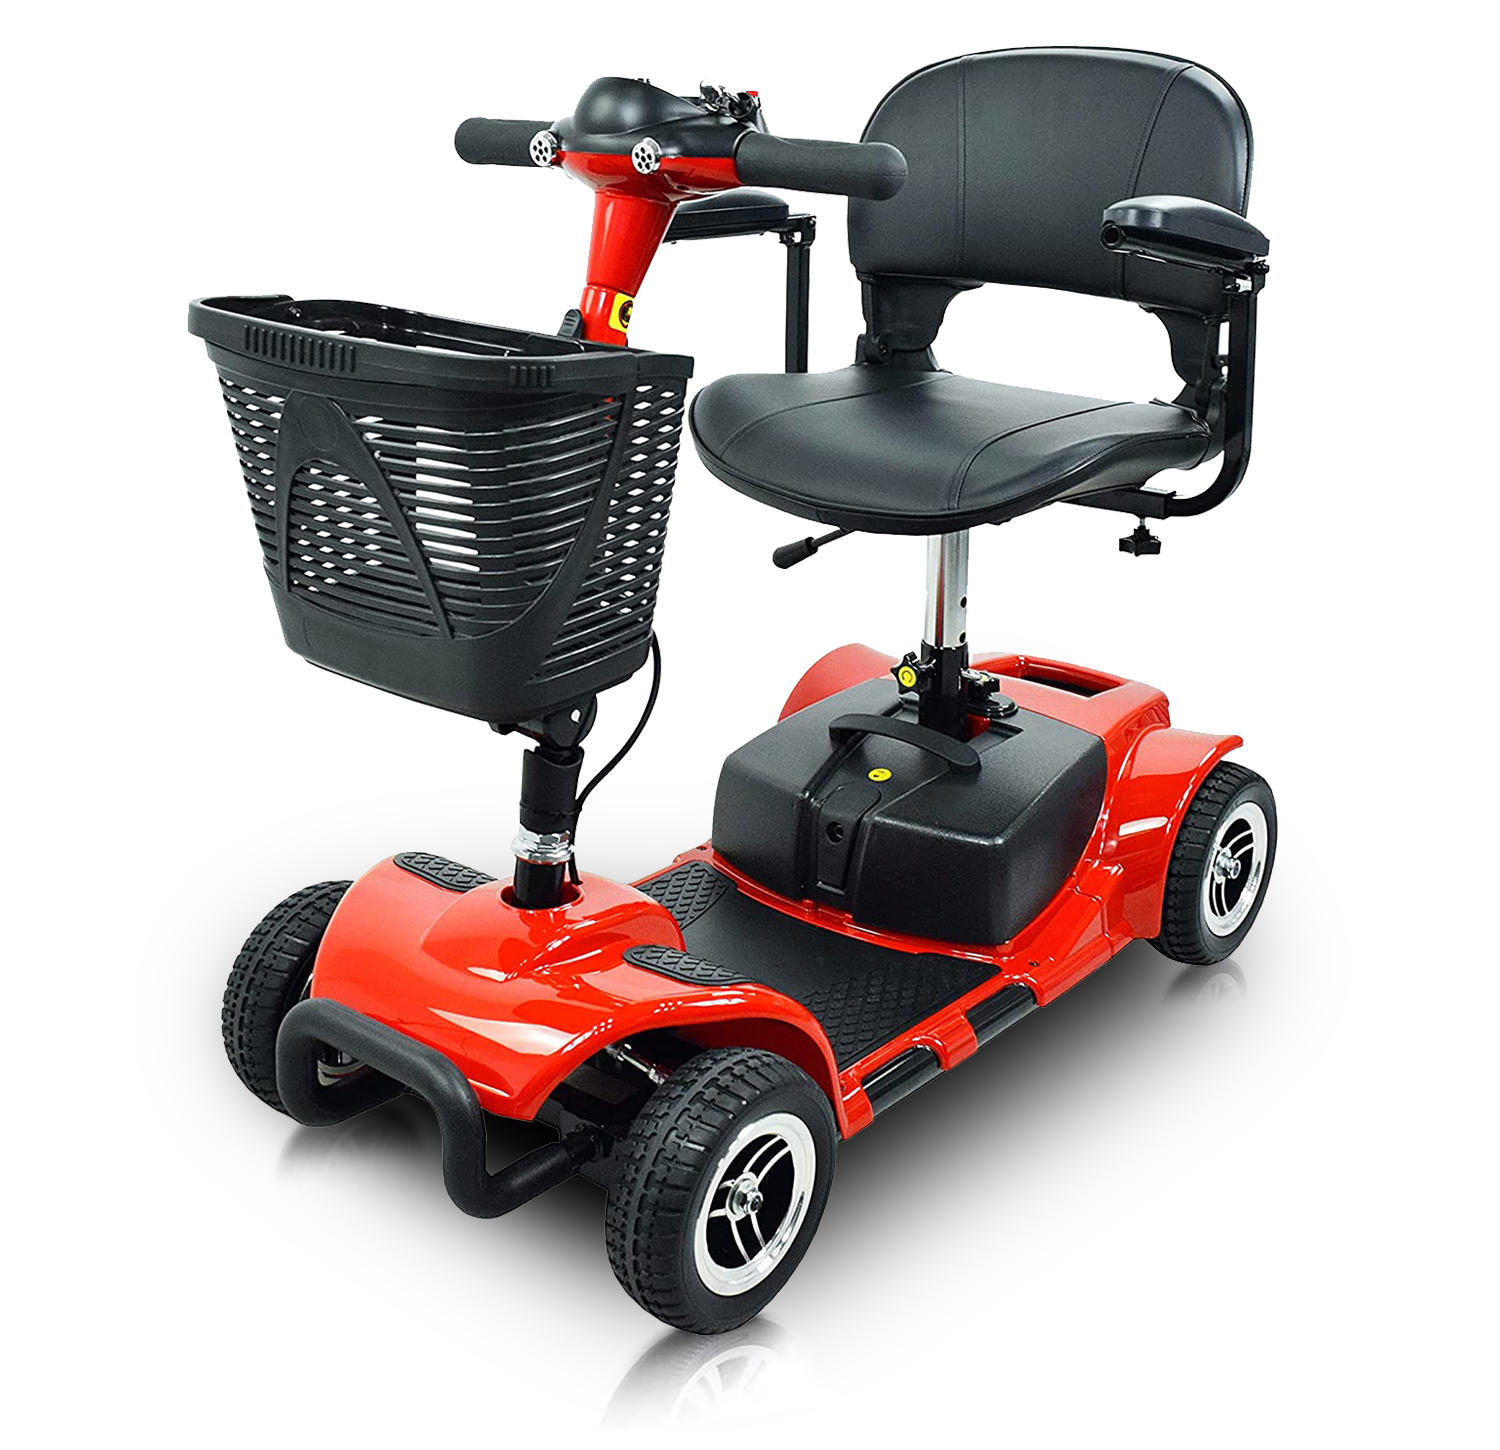 Emotor 265lbs Mobility Scooter for Seniors Elderly Adults, 250W Strong Motor w/ Stable 4 Wheels Scooter for Outdoor Driving 